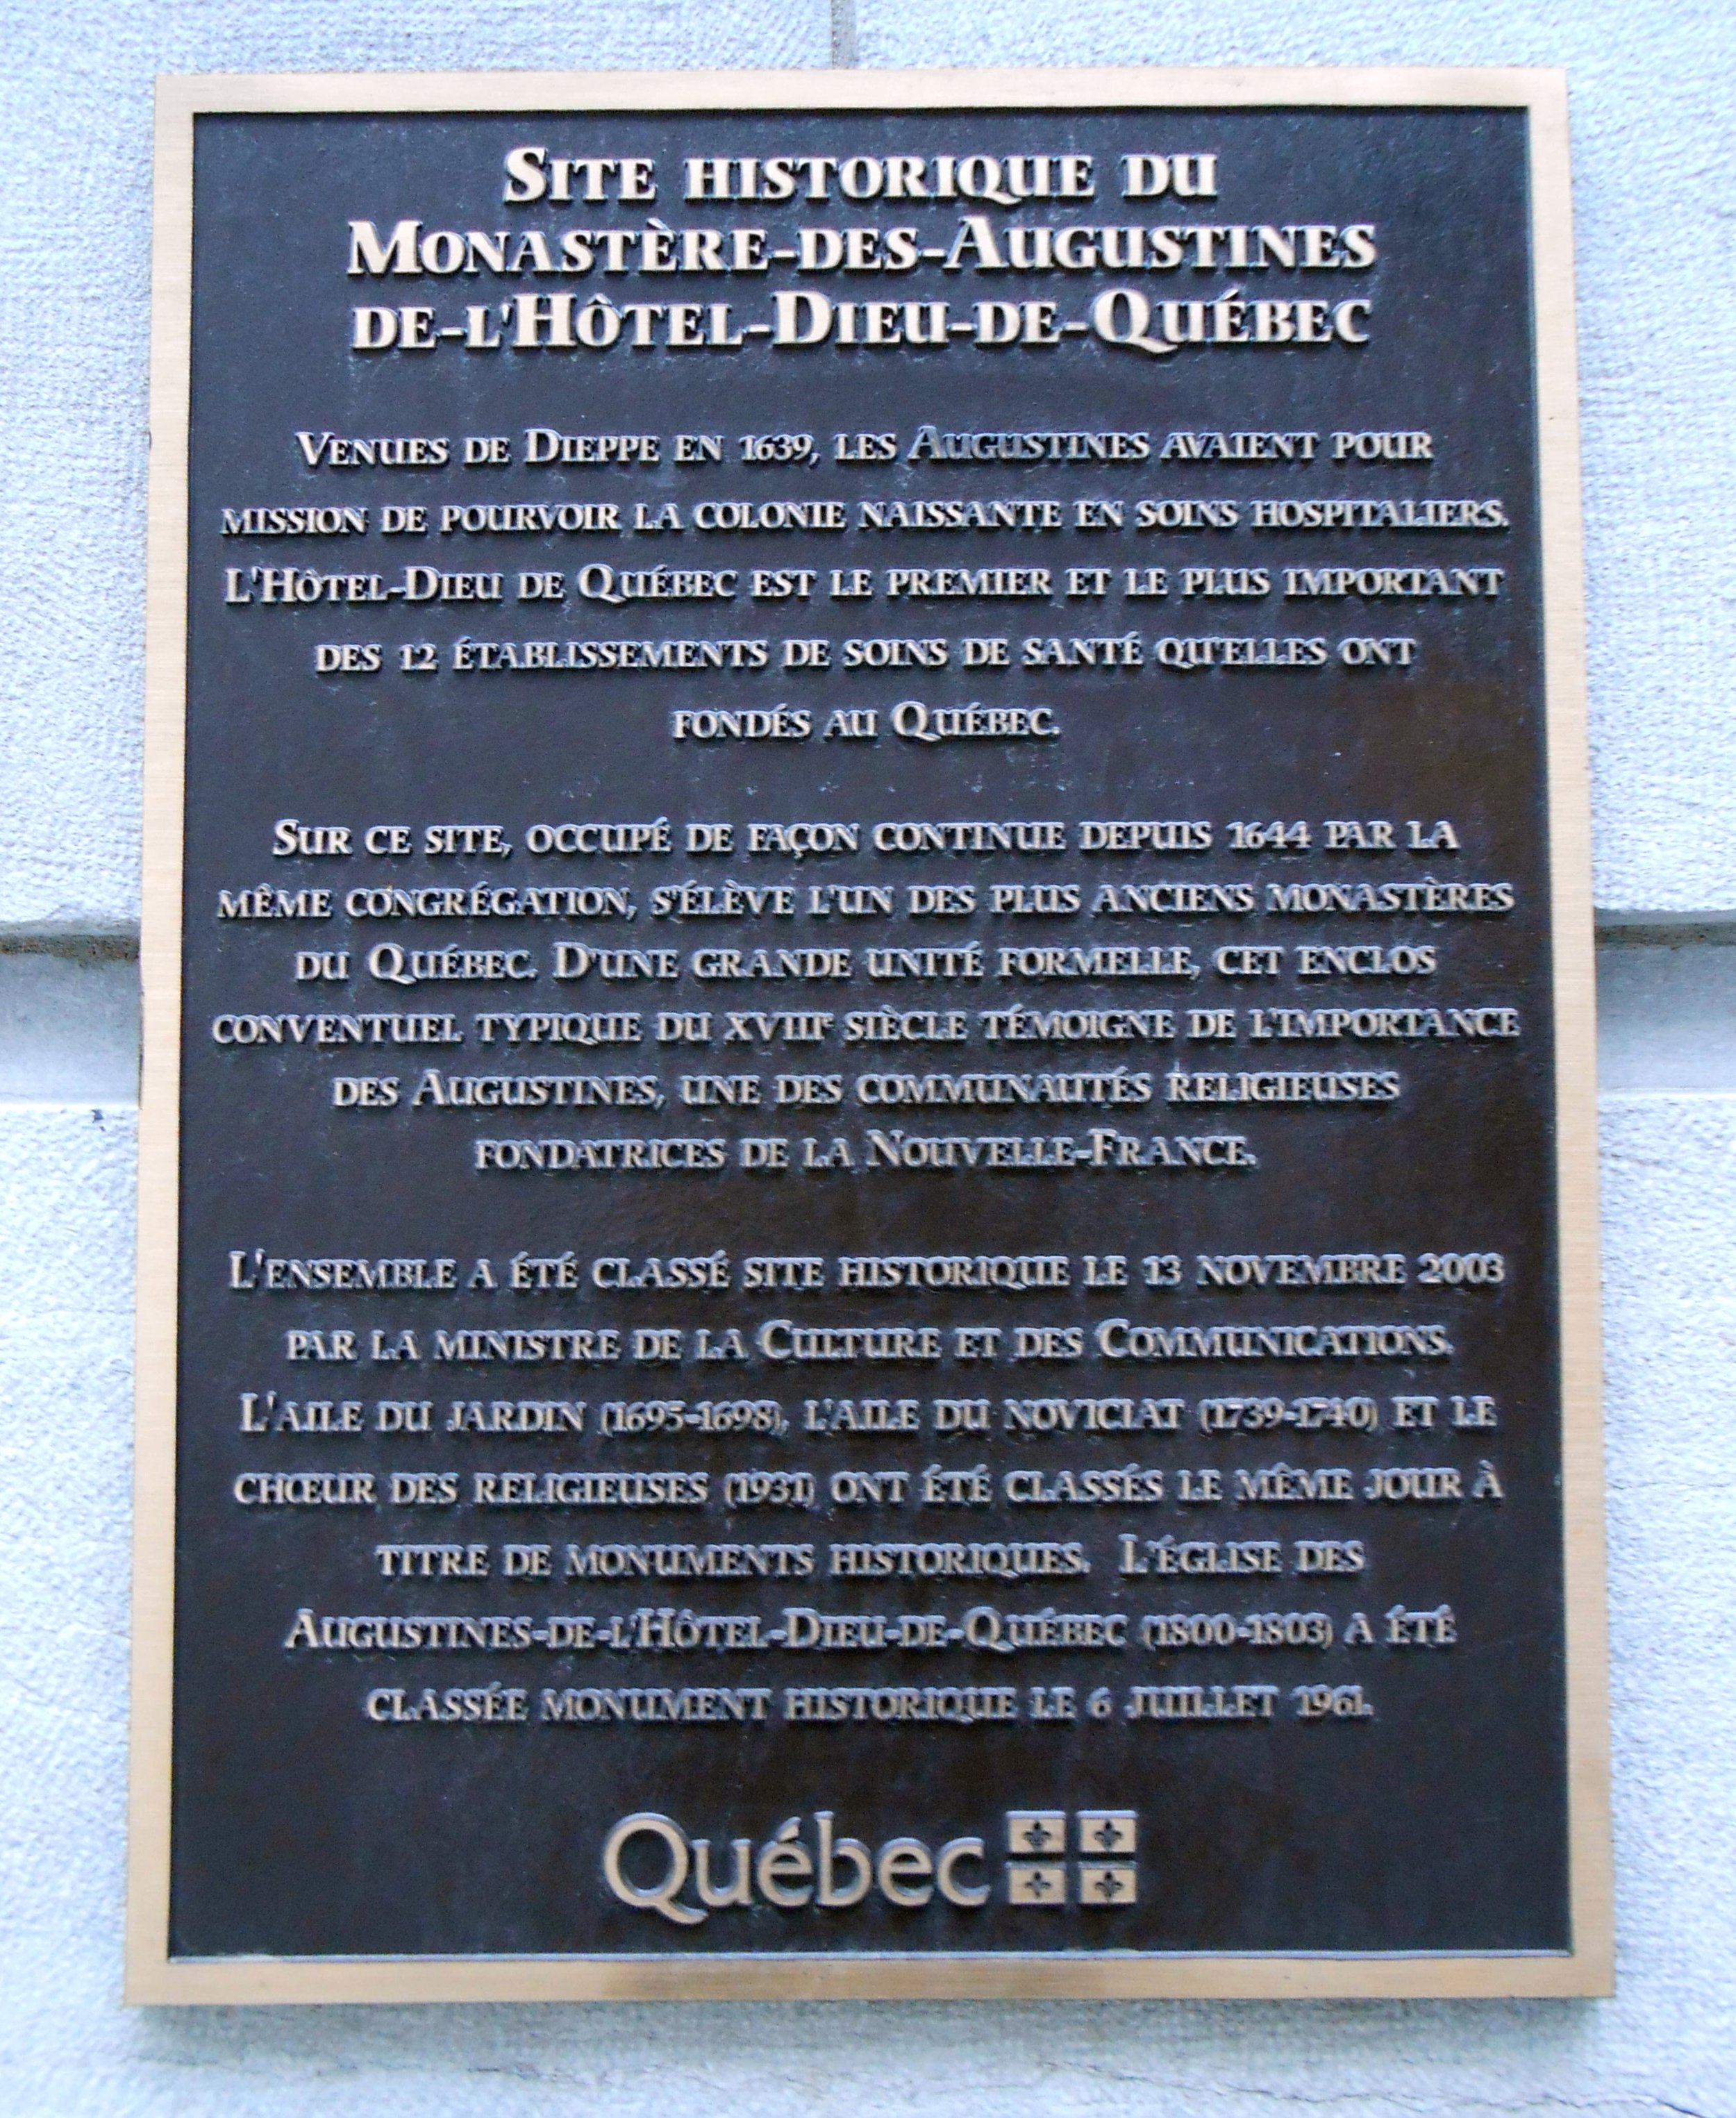 "Descriptive plaque of the historic site of the Augustinian monastery of the Hôtel-Dieu de Québec," 2013 photo by Jean Gagnon (Wikimedia Commons).